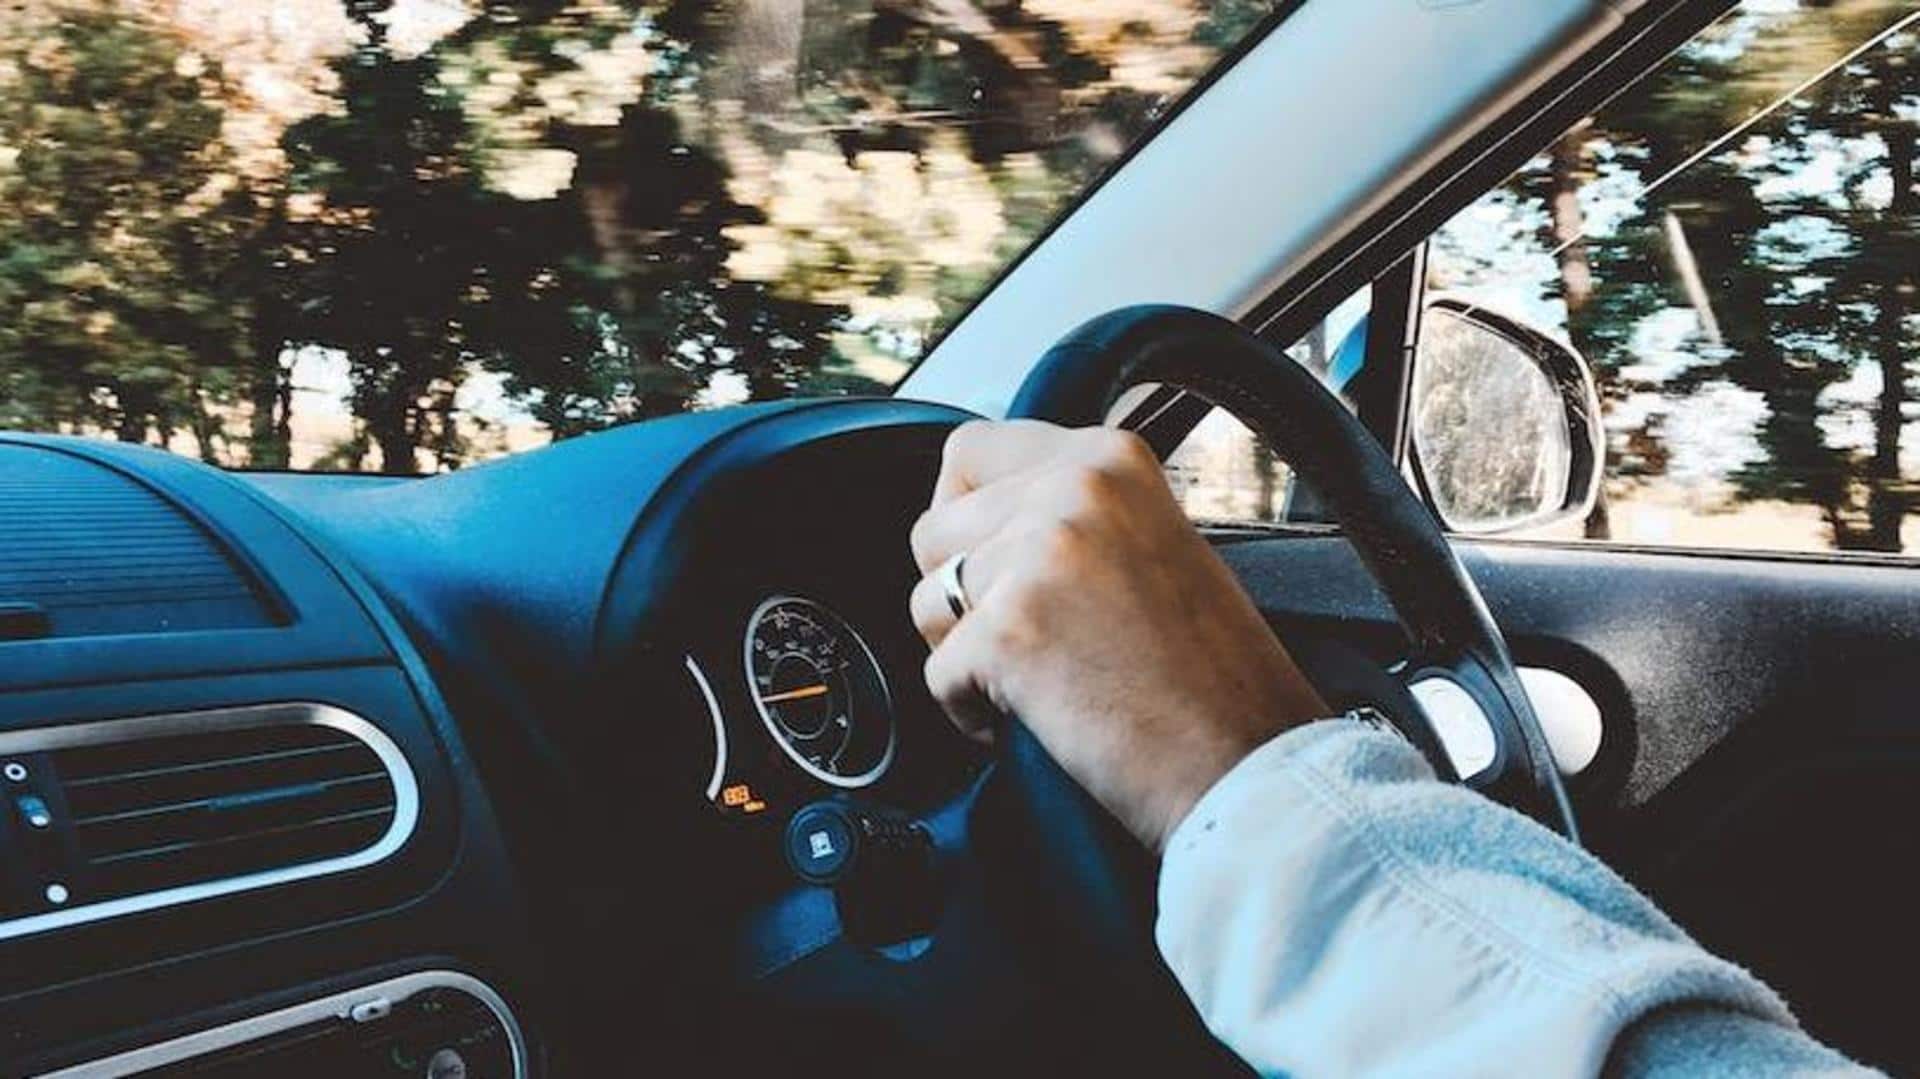 Do you fear driving? Here's how you can overcome it